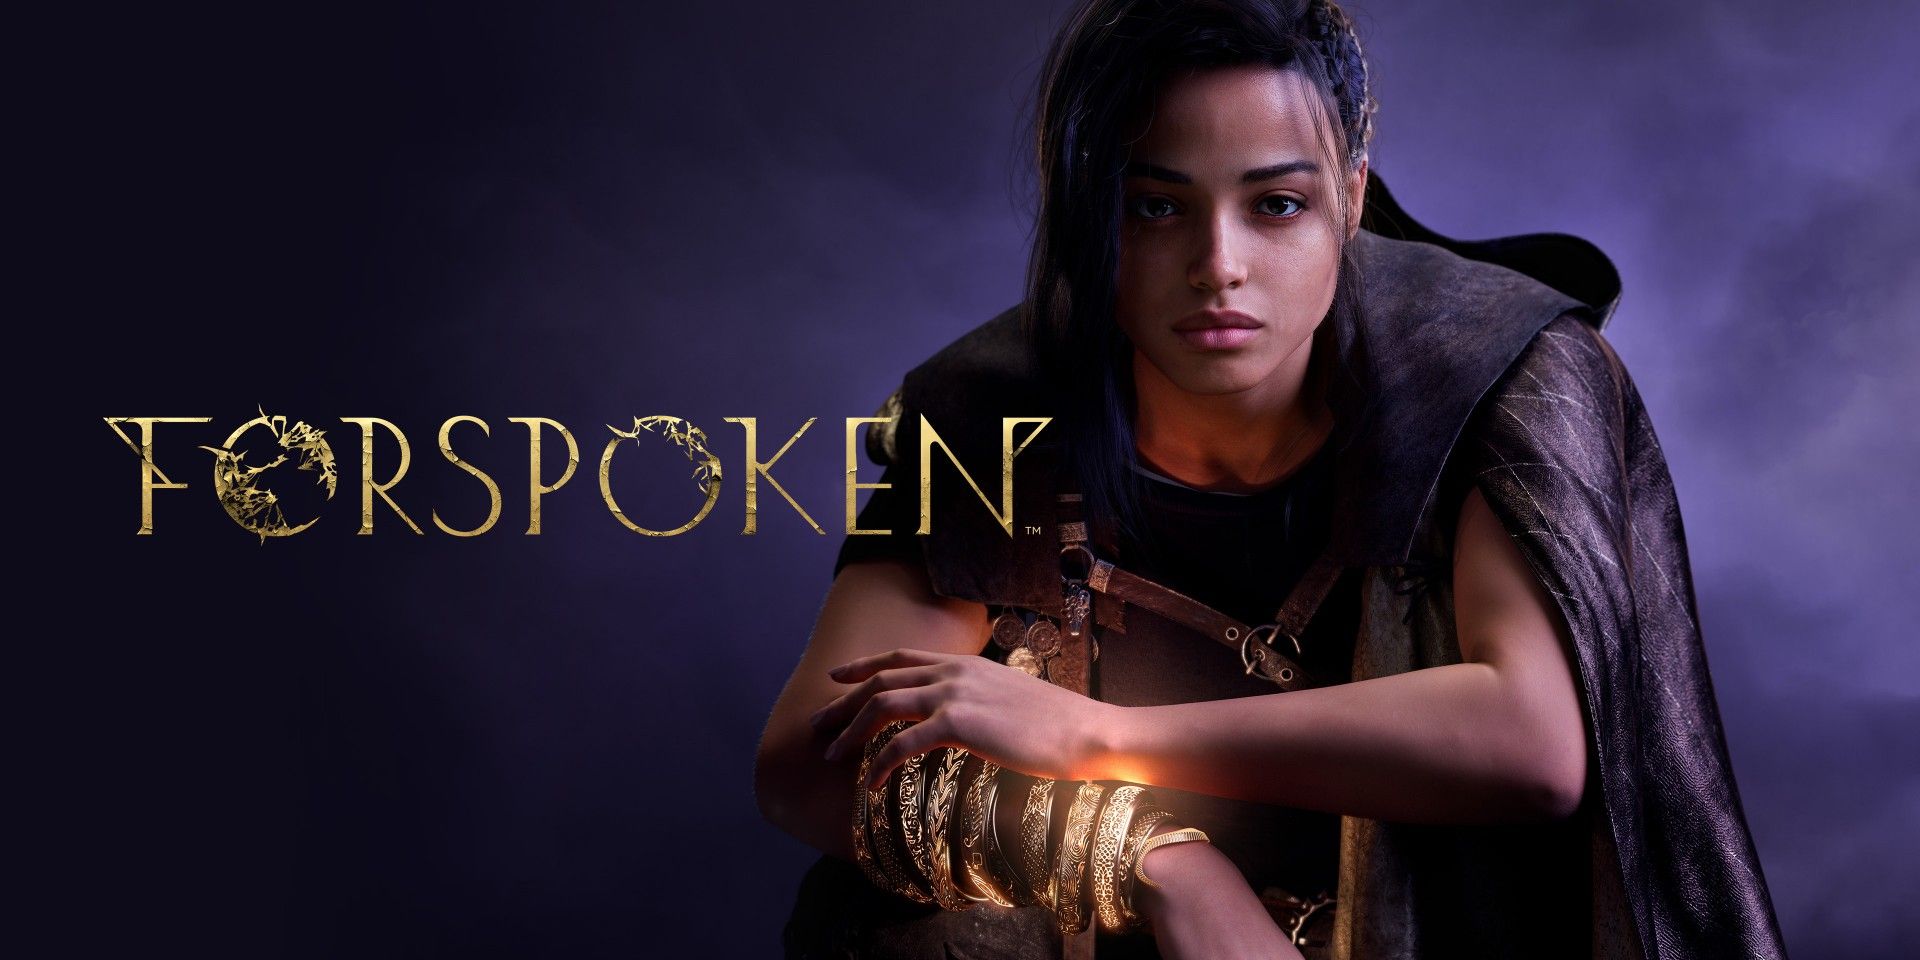 Forspoken Key Art showing protagonist Frey and the title.